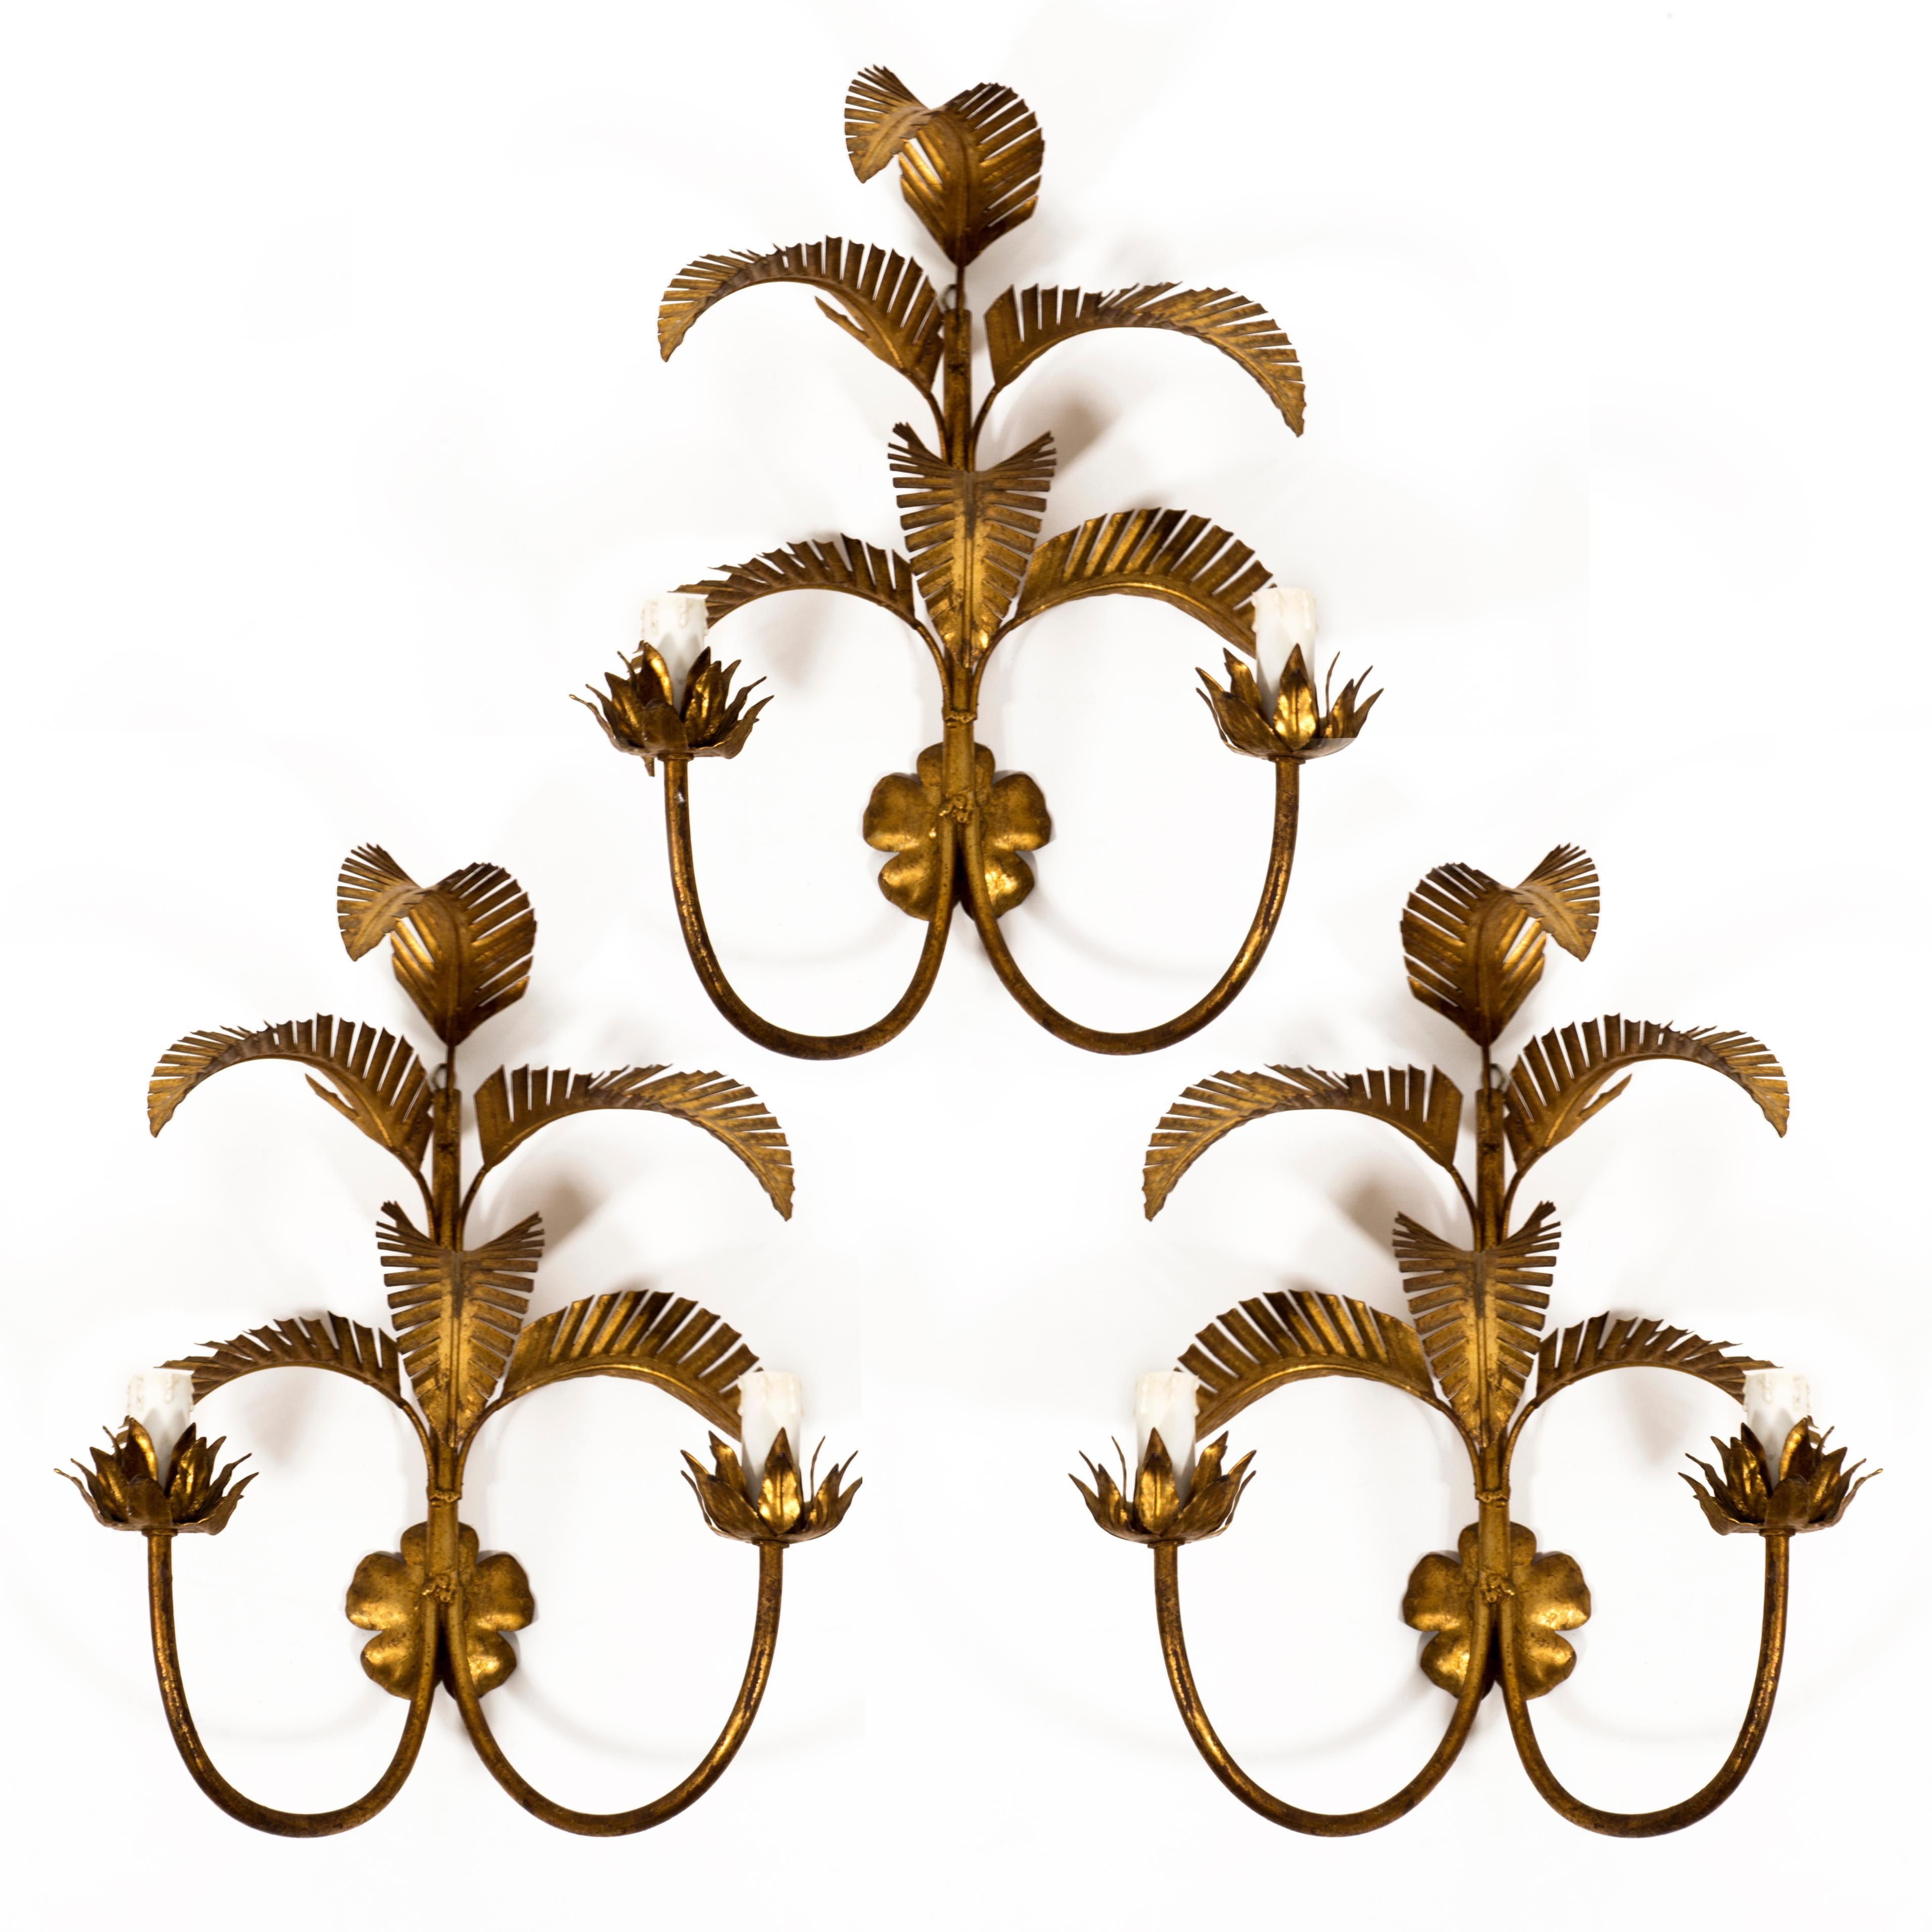 Goregous set consisting 3 italian gilt metal palm leaves Wall Lights Sconces rom the 1970s. Each lamp has two holders fitted with E14 sockets.
These lamps are both lighting and sculpture. Suitable for all living areas and highly decorative.
Very